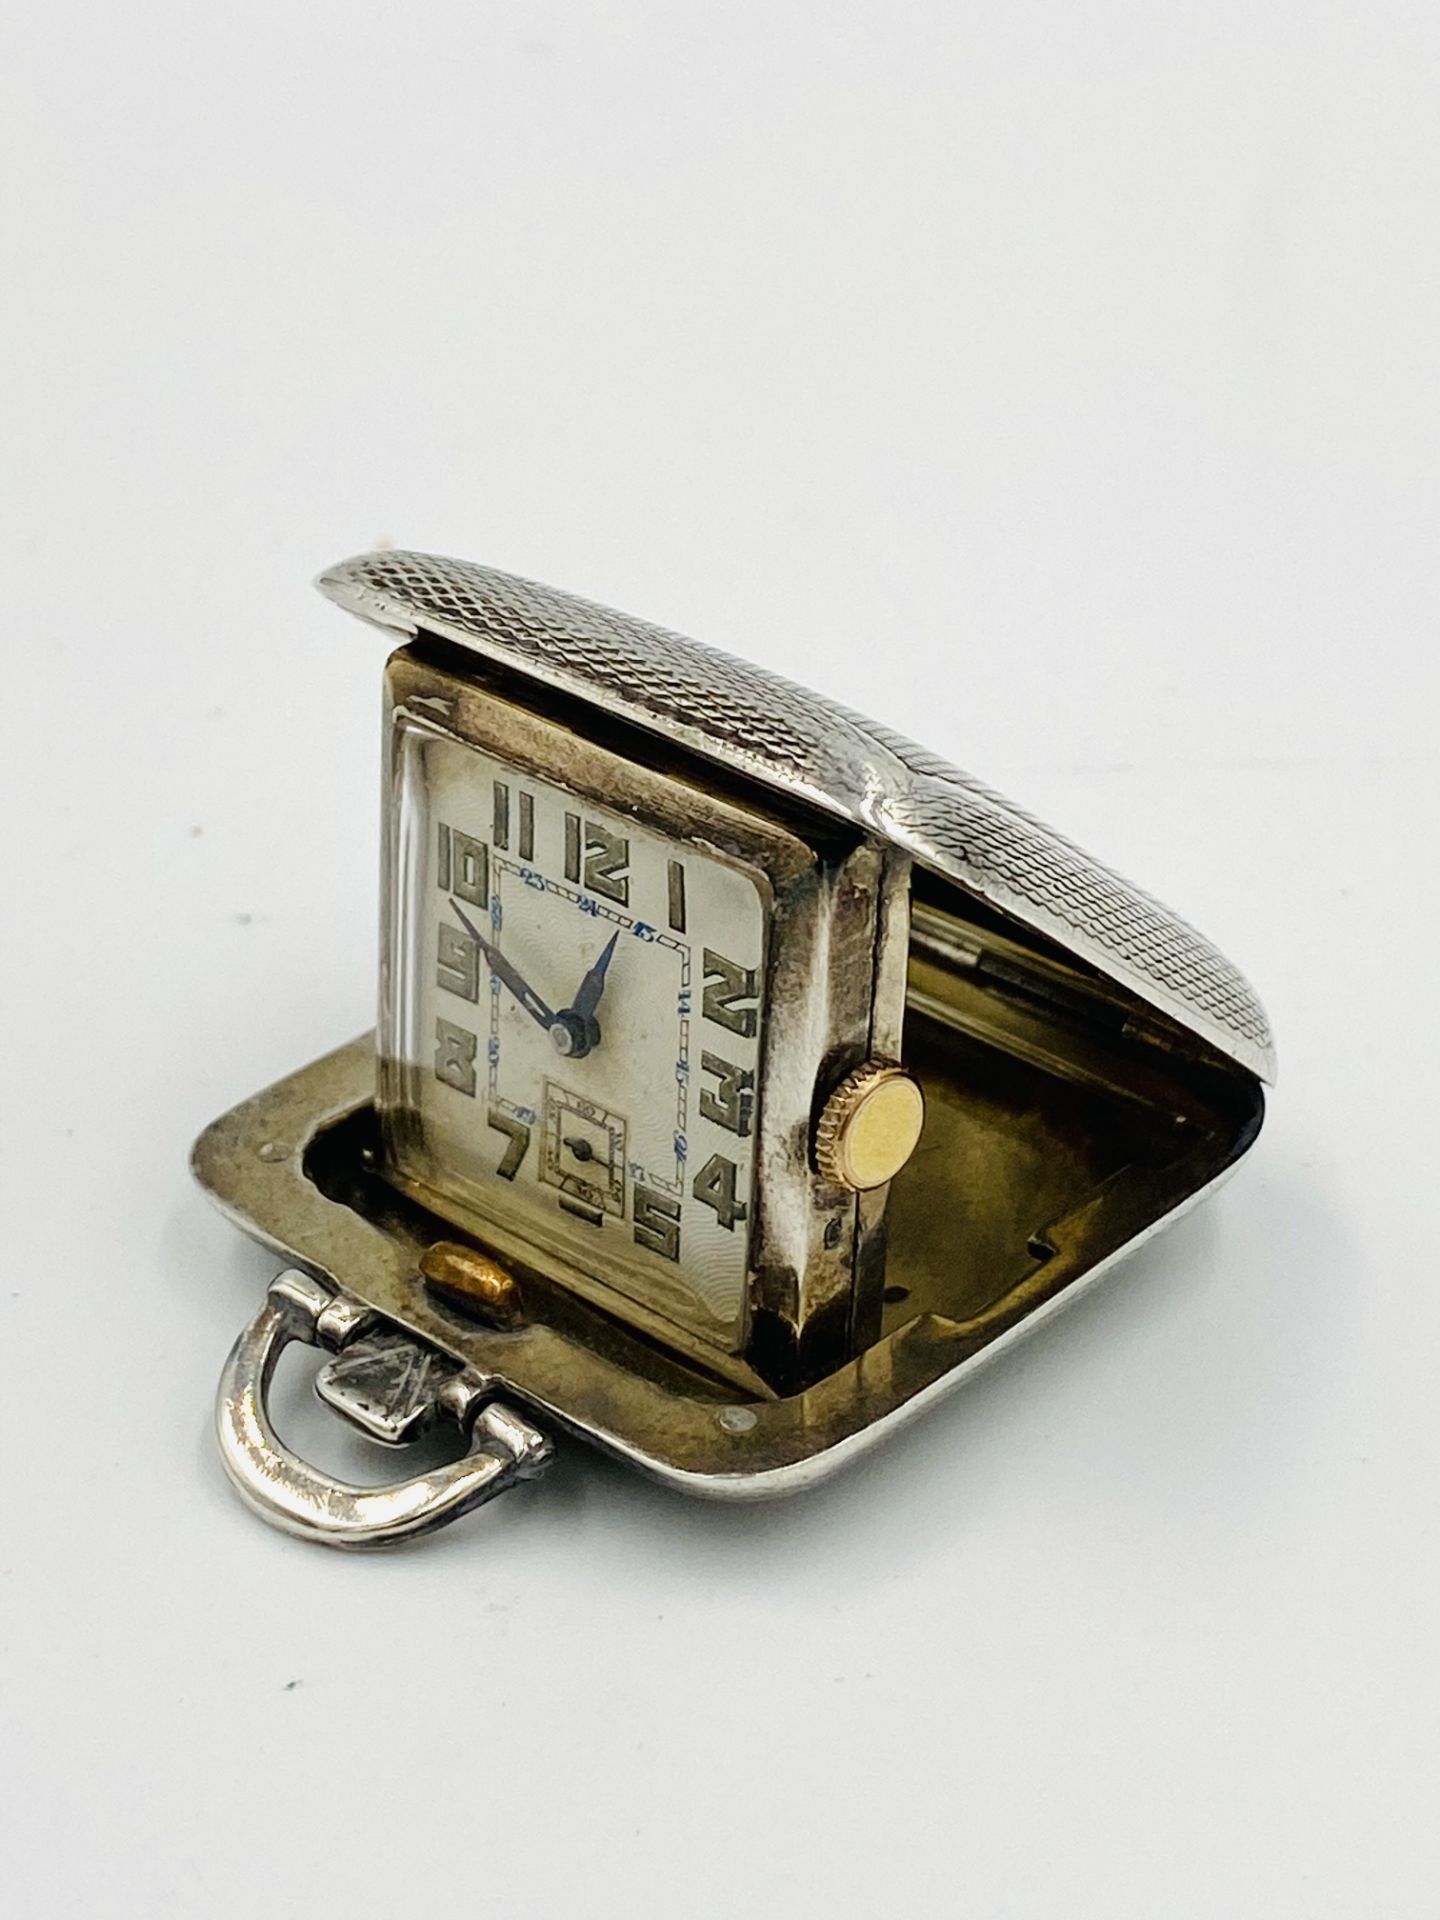 Silver cased purse watch - Image 2 of 4